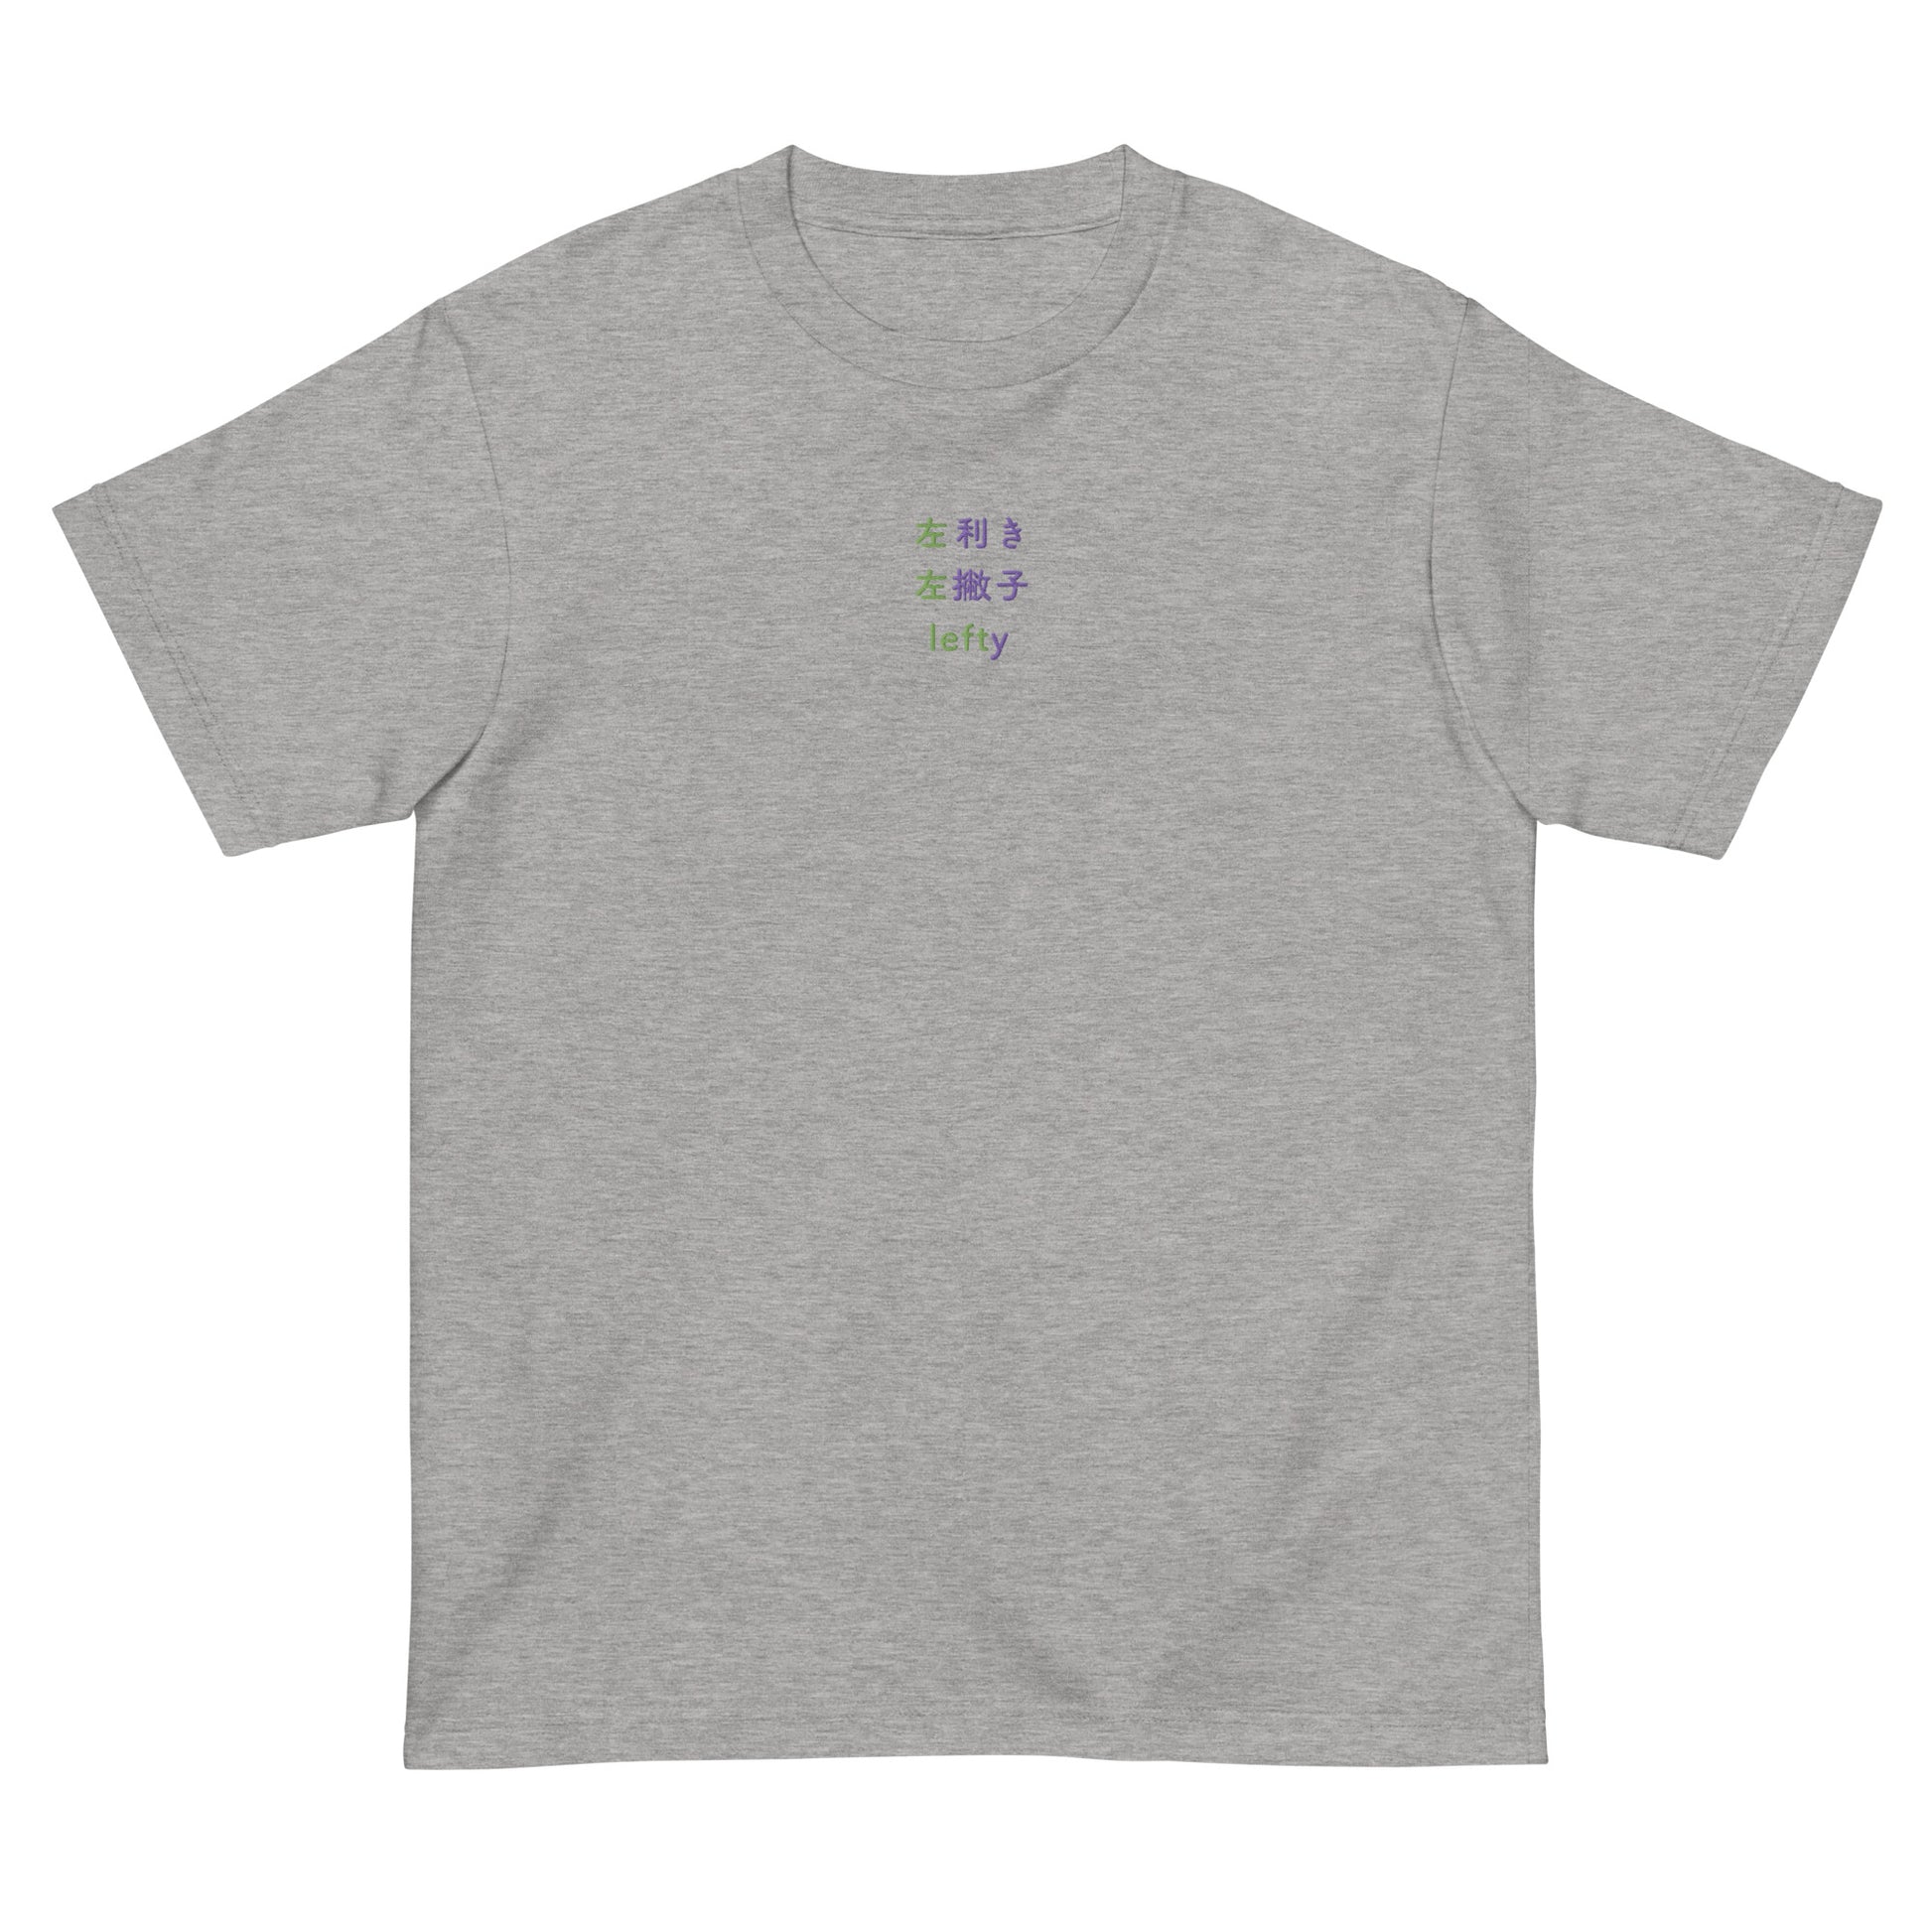 Light Gray High Quality Tee - Front Design with an Green, Purple Embroidery "Lefty" in Japanese,Chinese and English